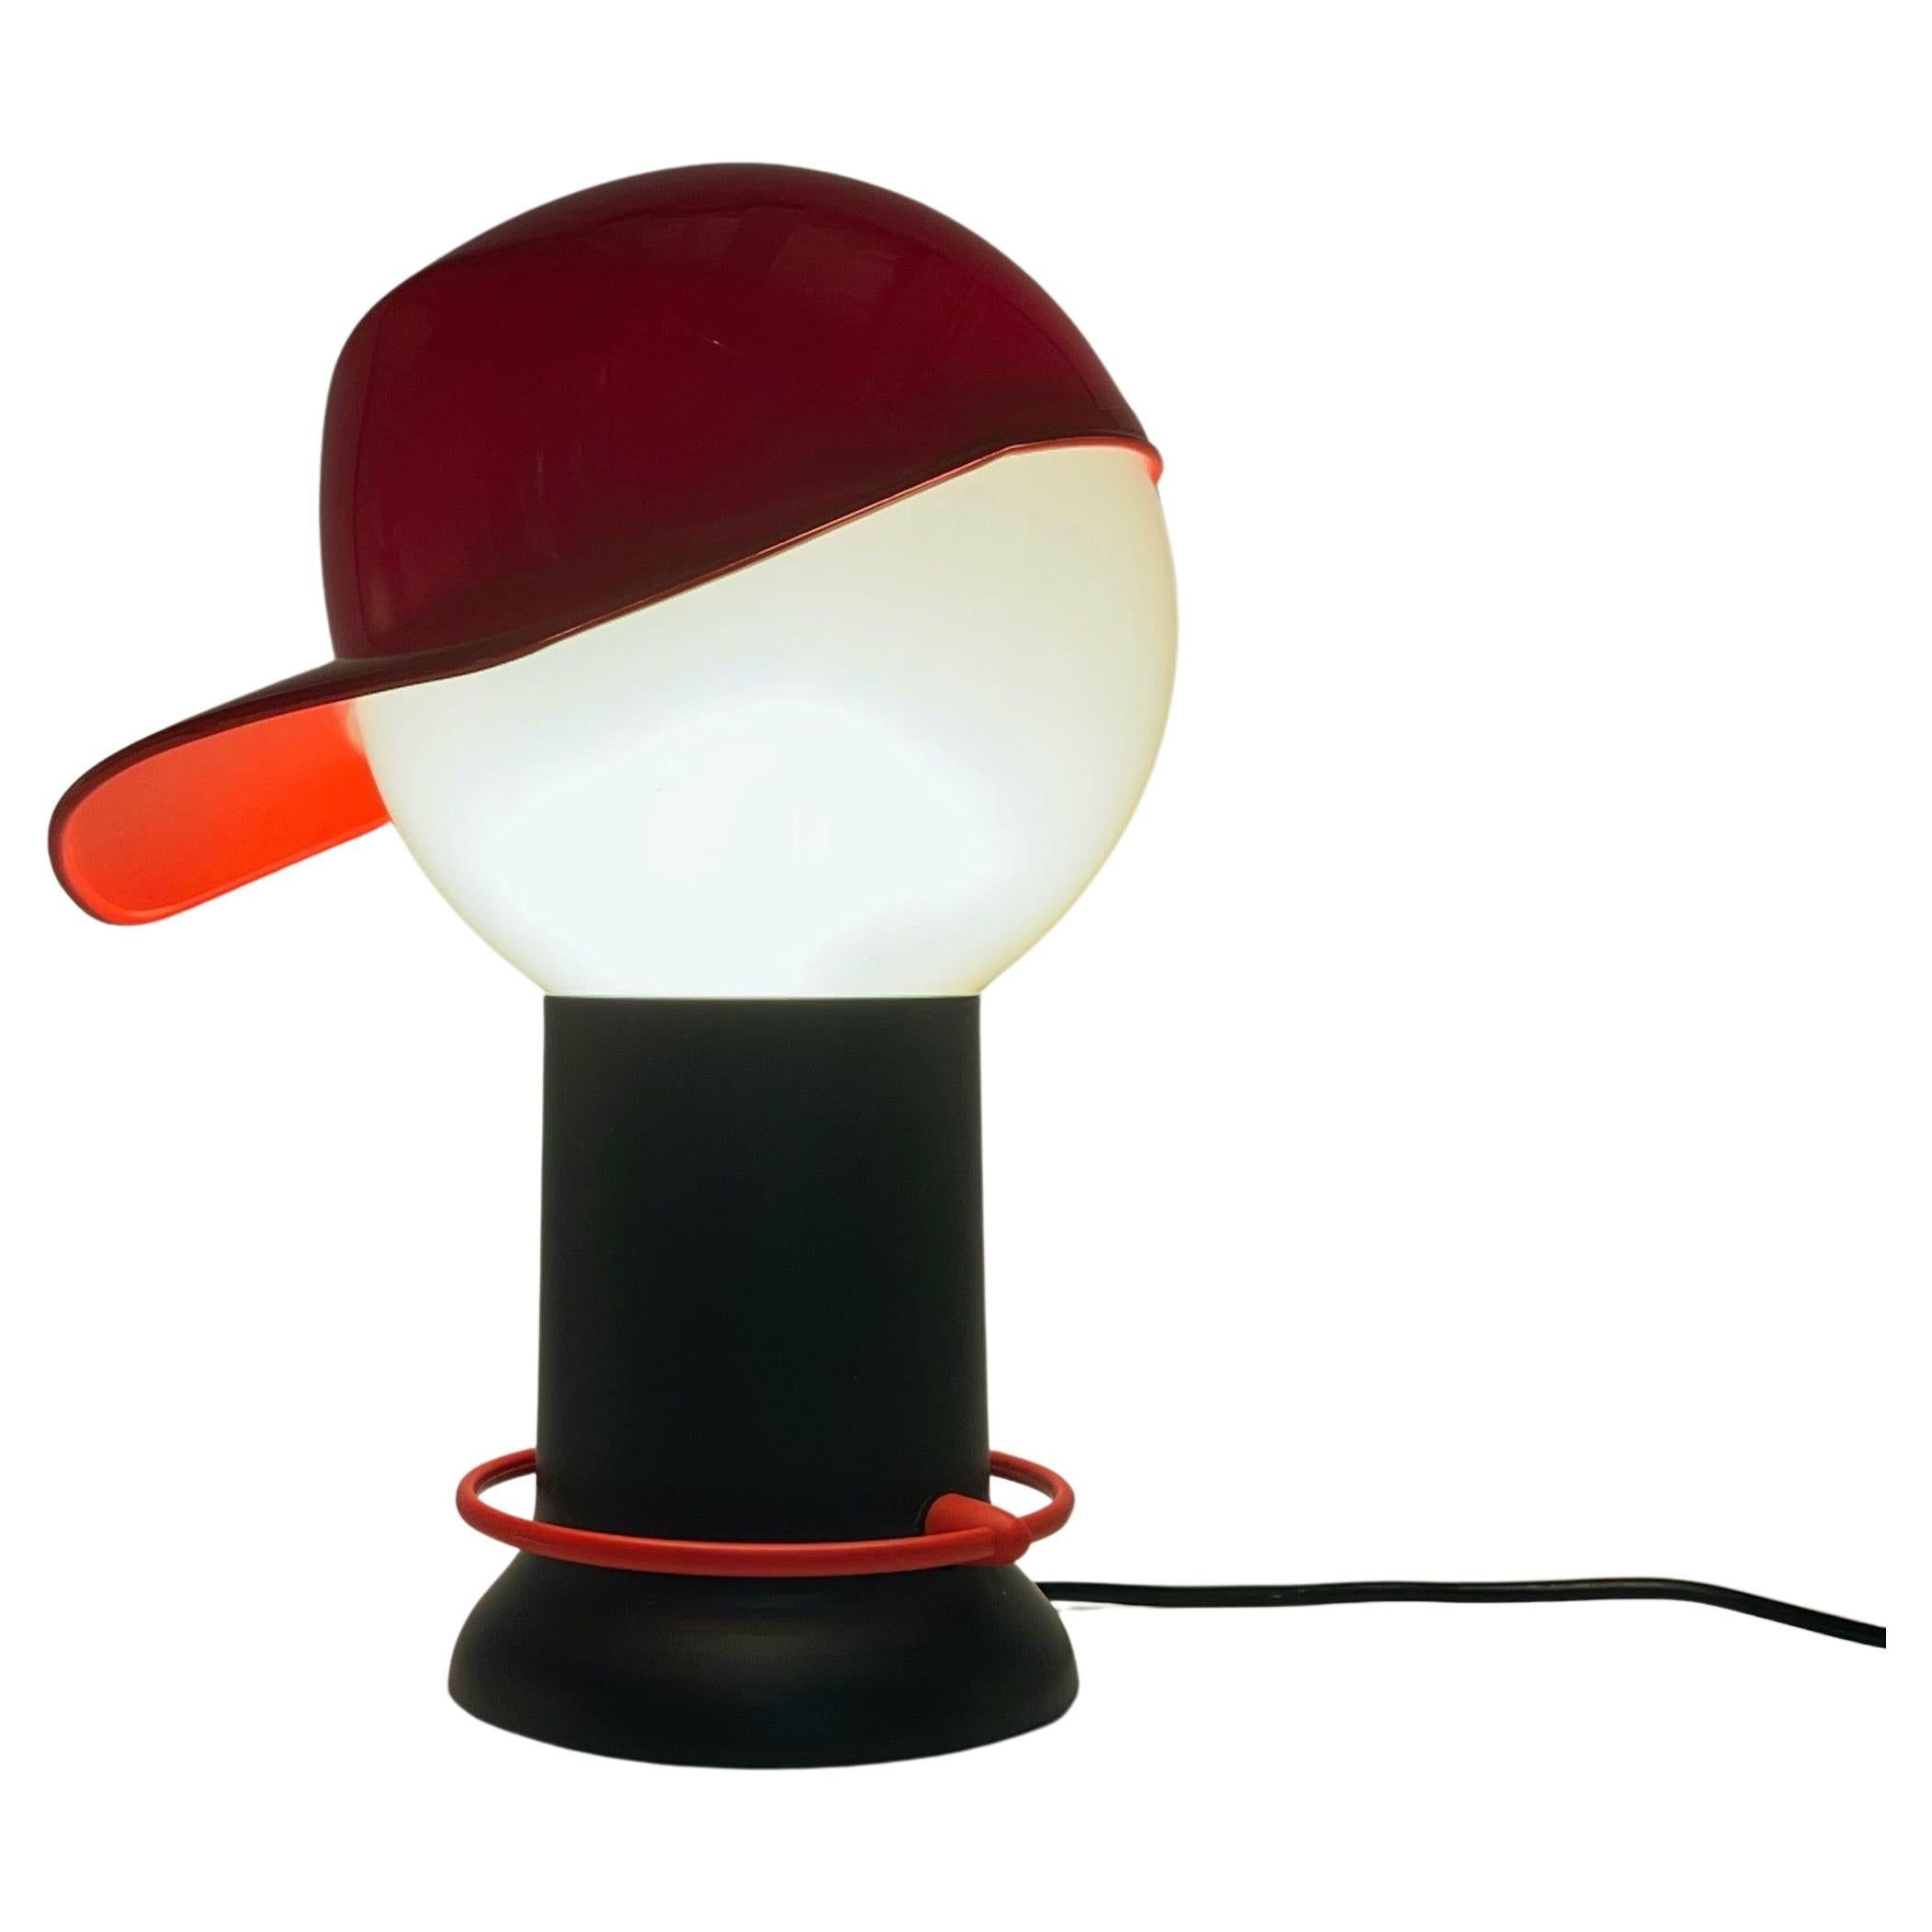 Iconic 'CAP' Table Lamp by Giorgetto Giugiaro for Bilumen Italy, 1980s For Sale